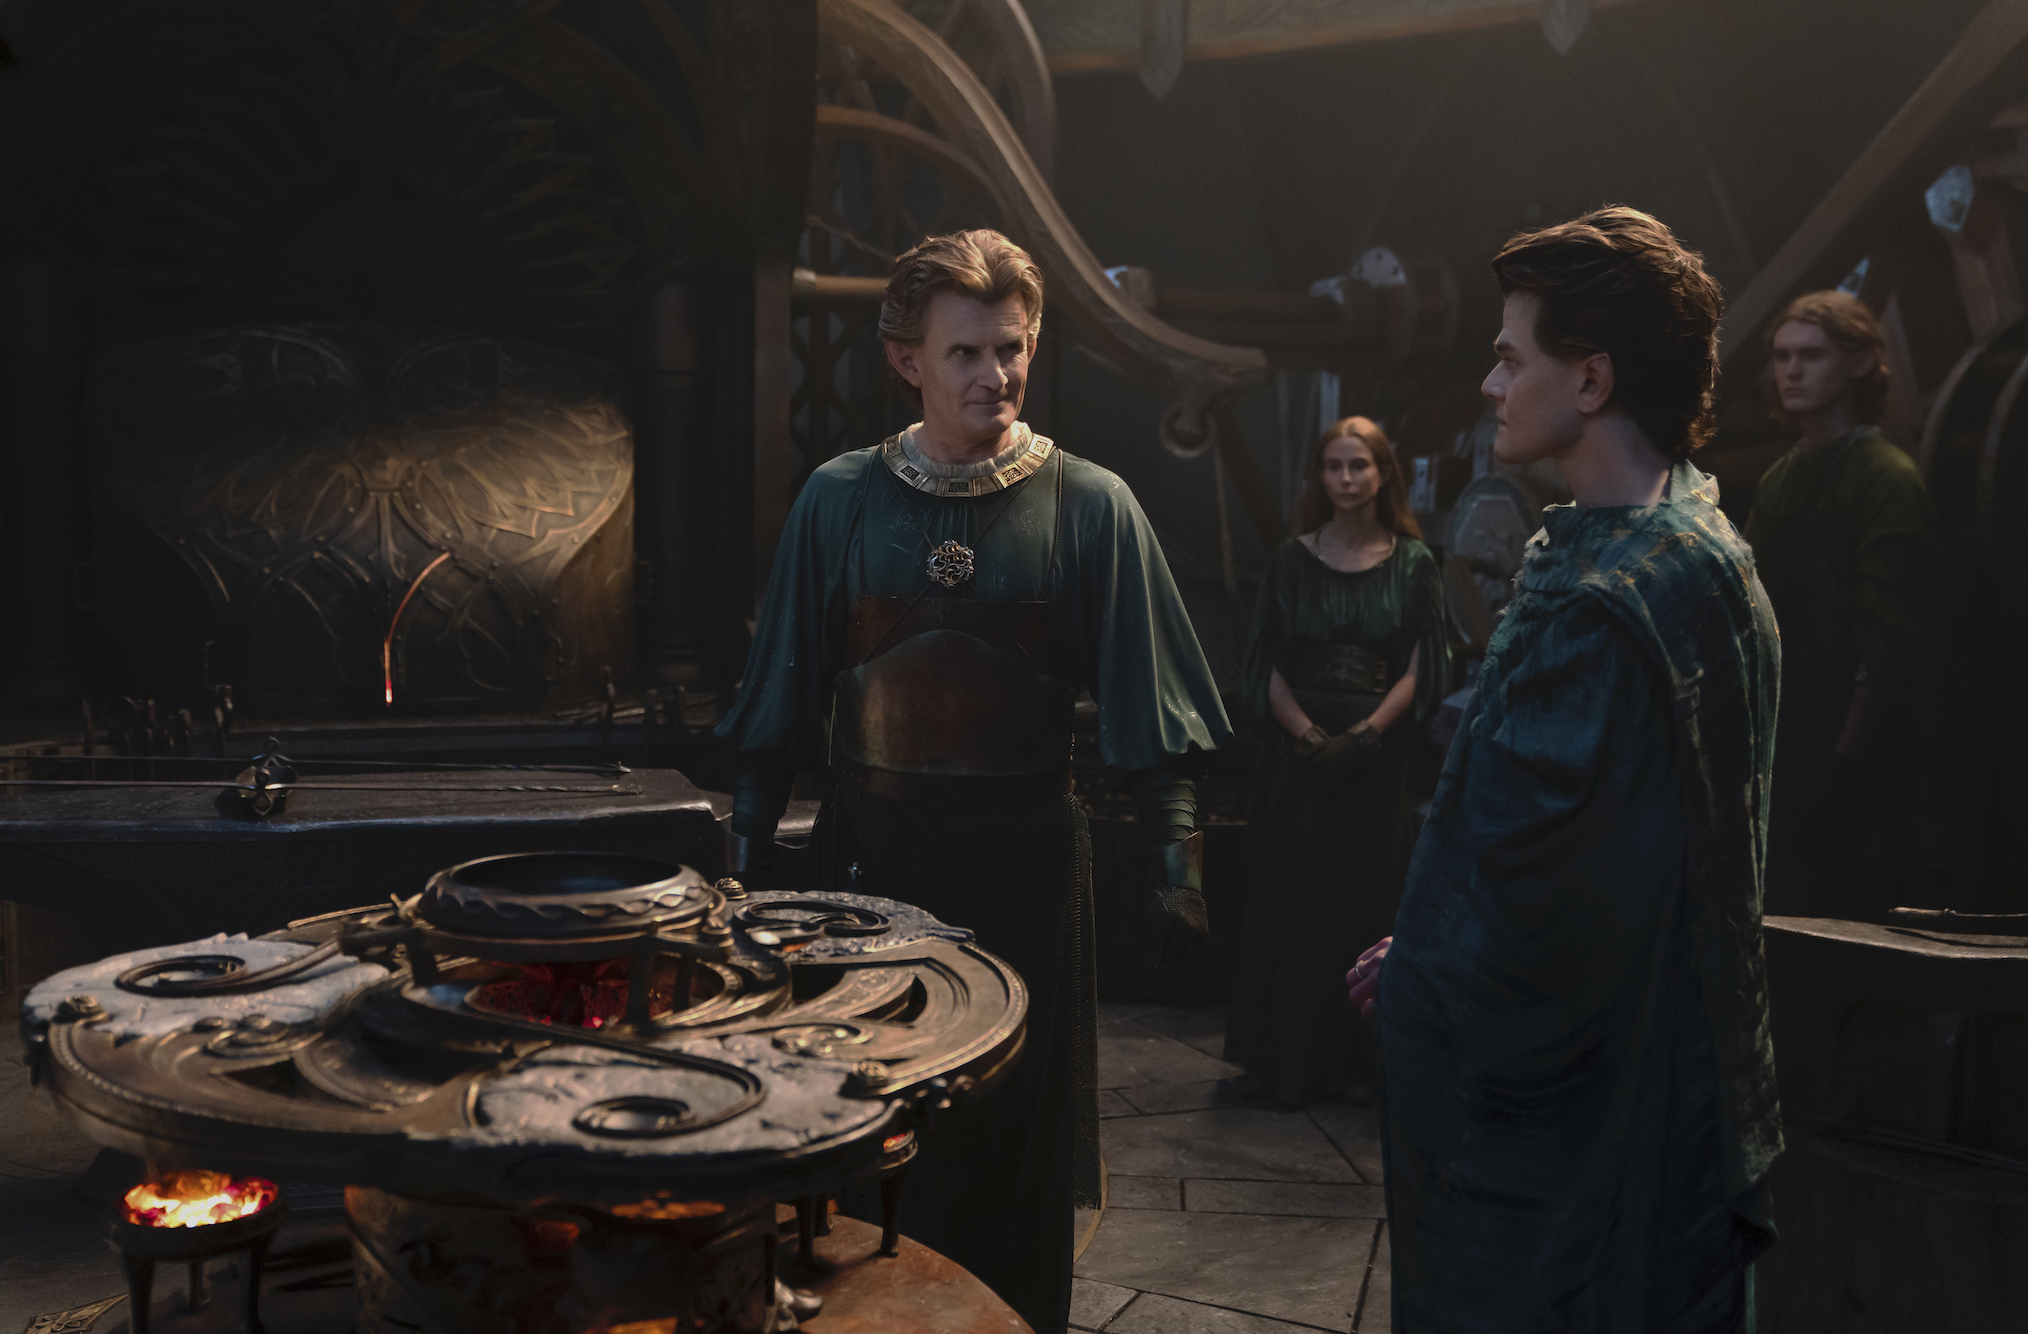 Charles Edwards (Celebrimbor), Robert Aramayo (Elrond) in 'The Lord of the Rings: The Rings of Power' finale